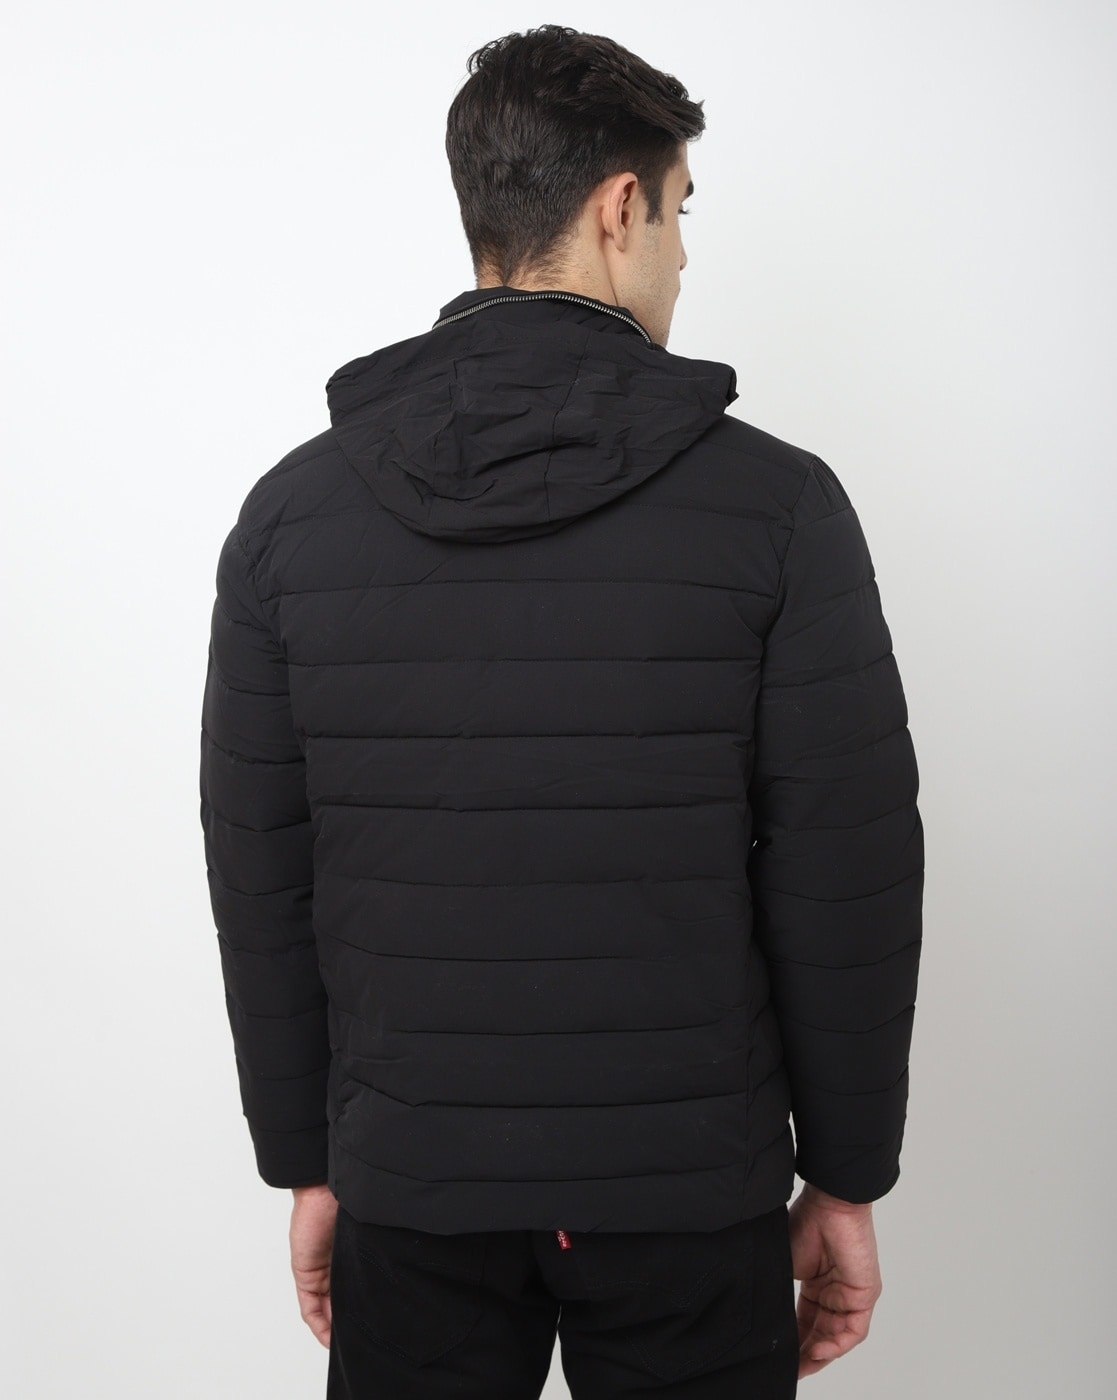 Aggregate more than 67 hollister puffer jacket mens best - in.thdonghoadian